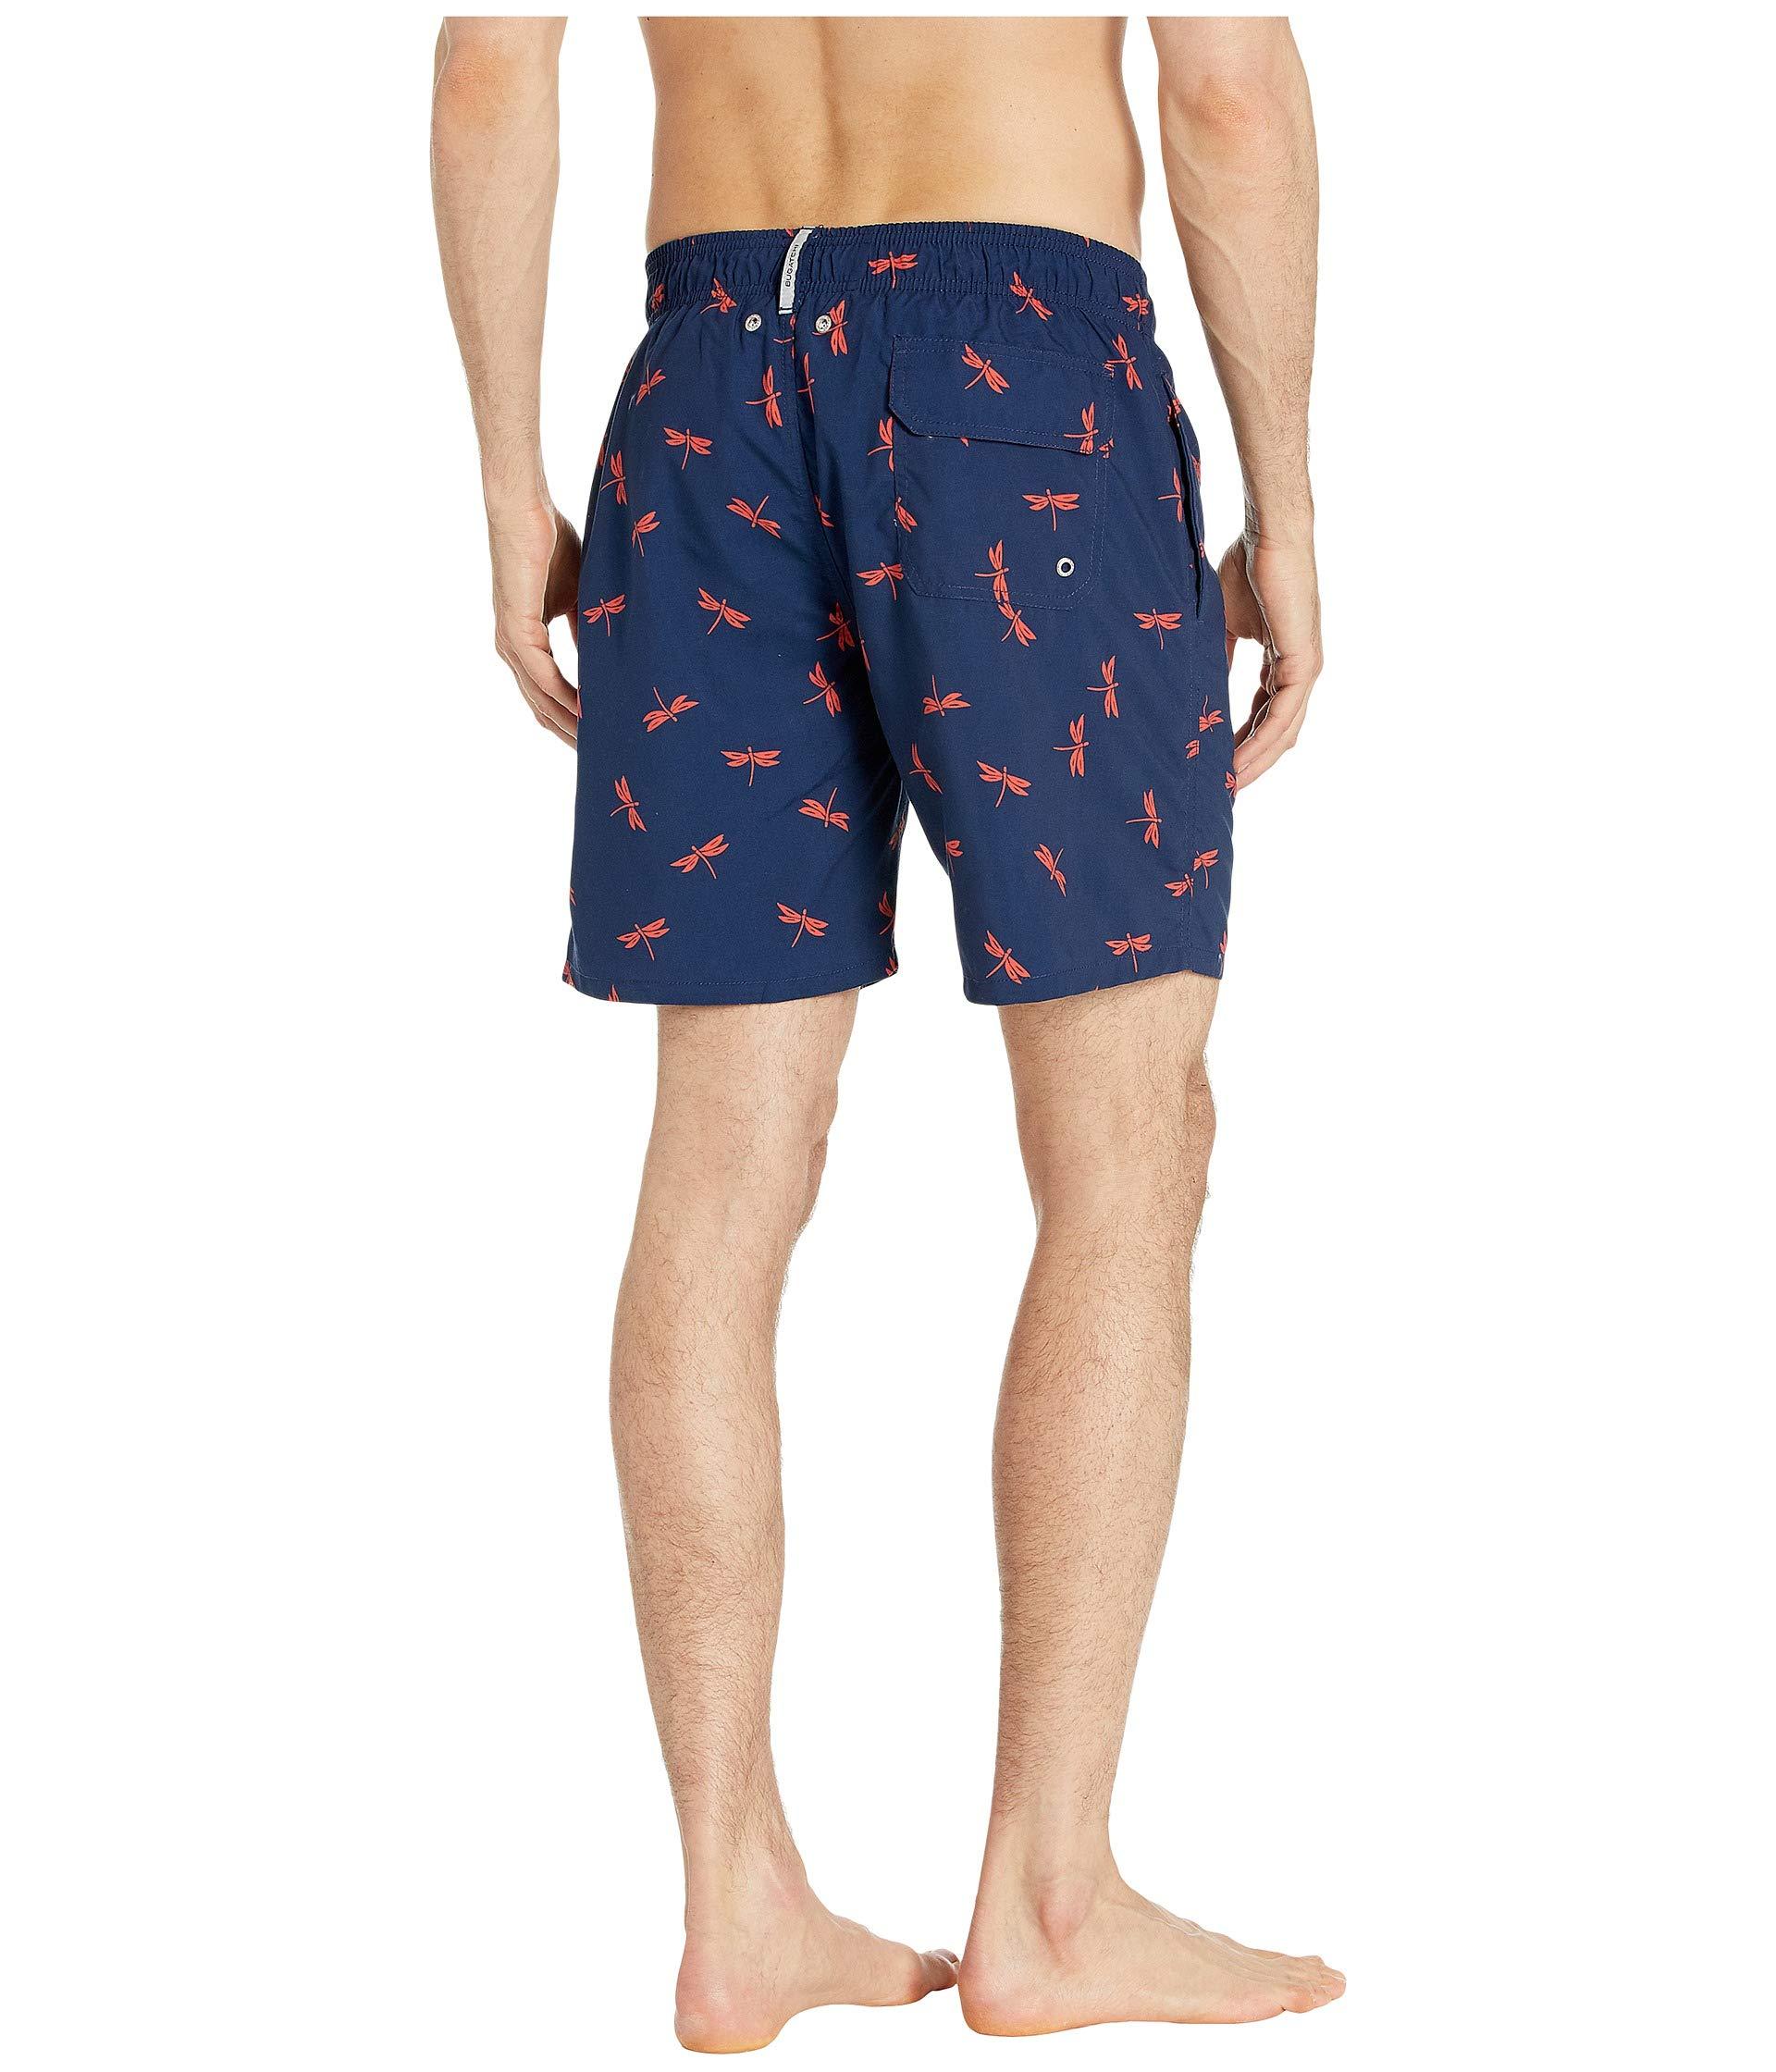 Bugatchi Synthetic Dragonfly Swim Shorts in Navy (Blue) for Men - Lyst